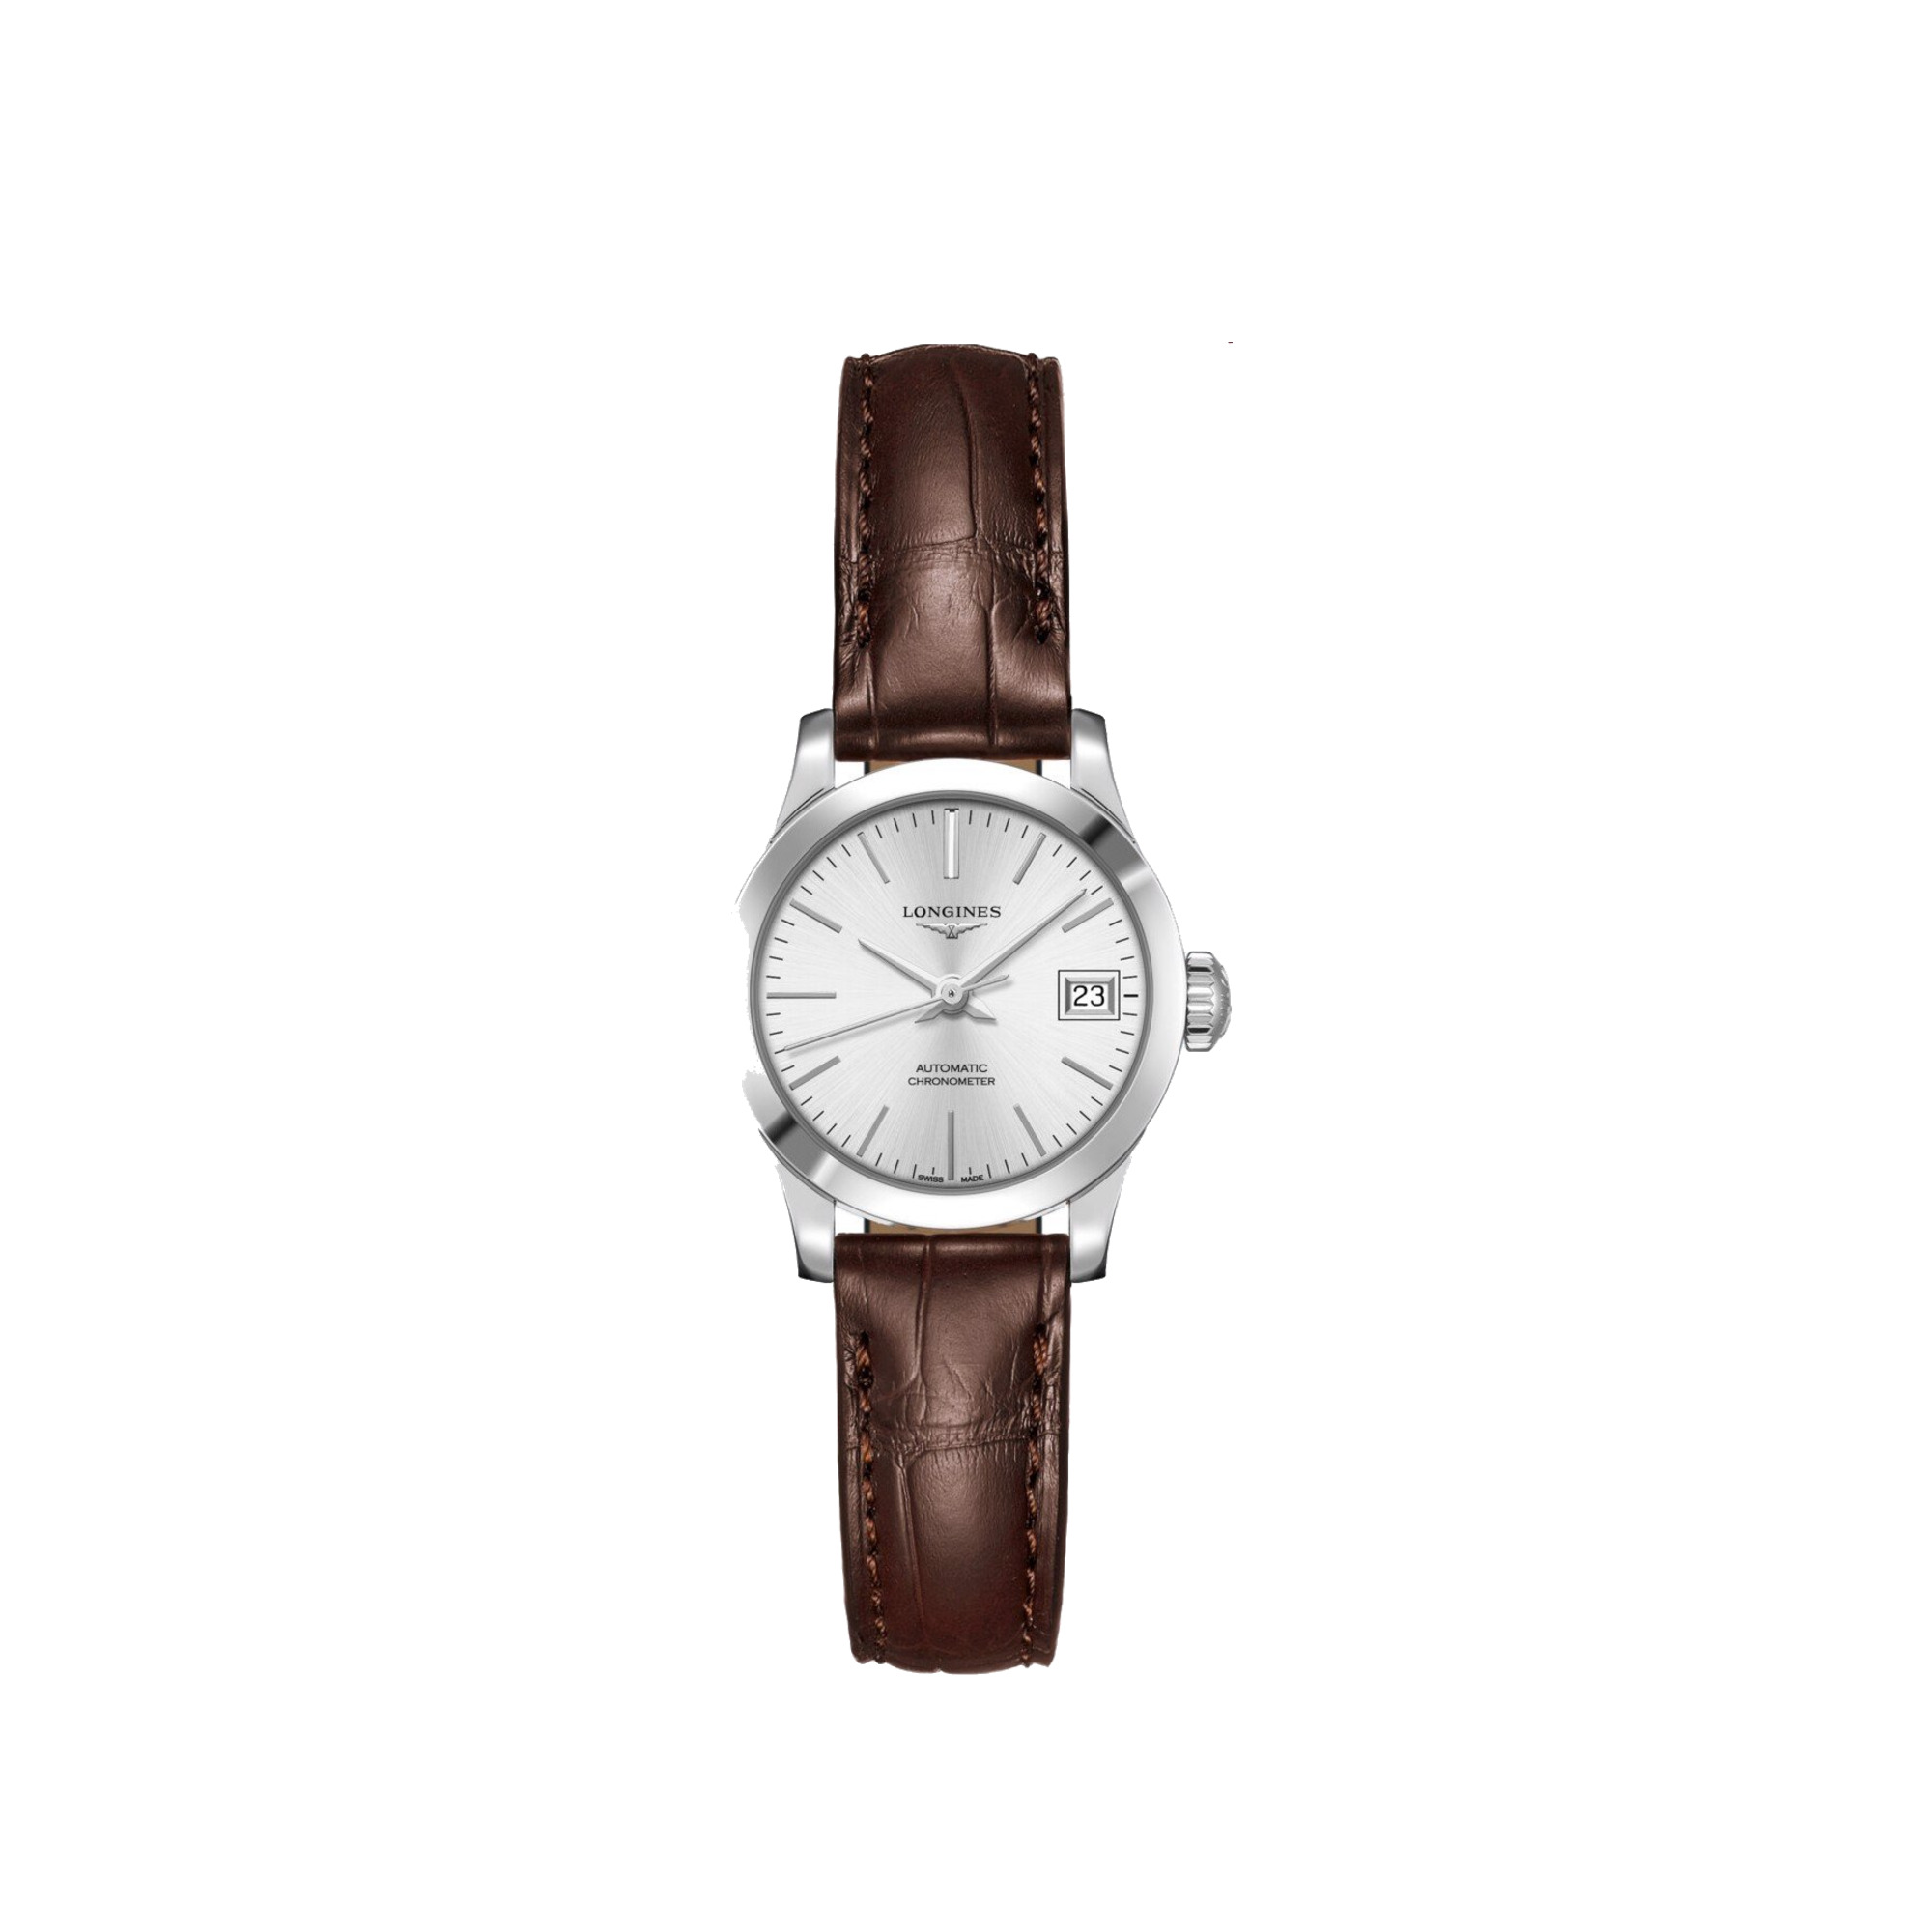 Đồng hồ nữ Longines Collection Record L2.320.4.72.2